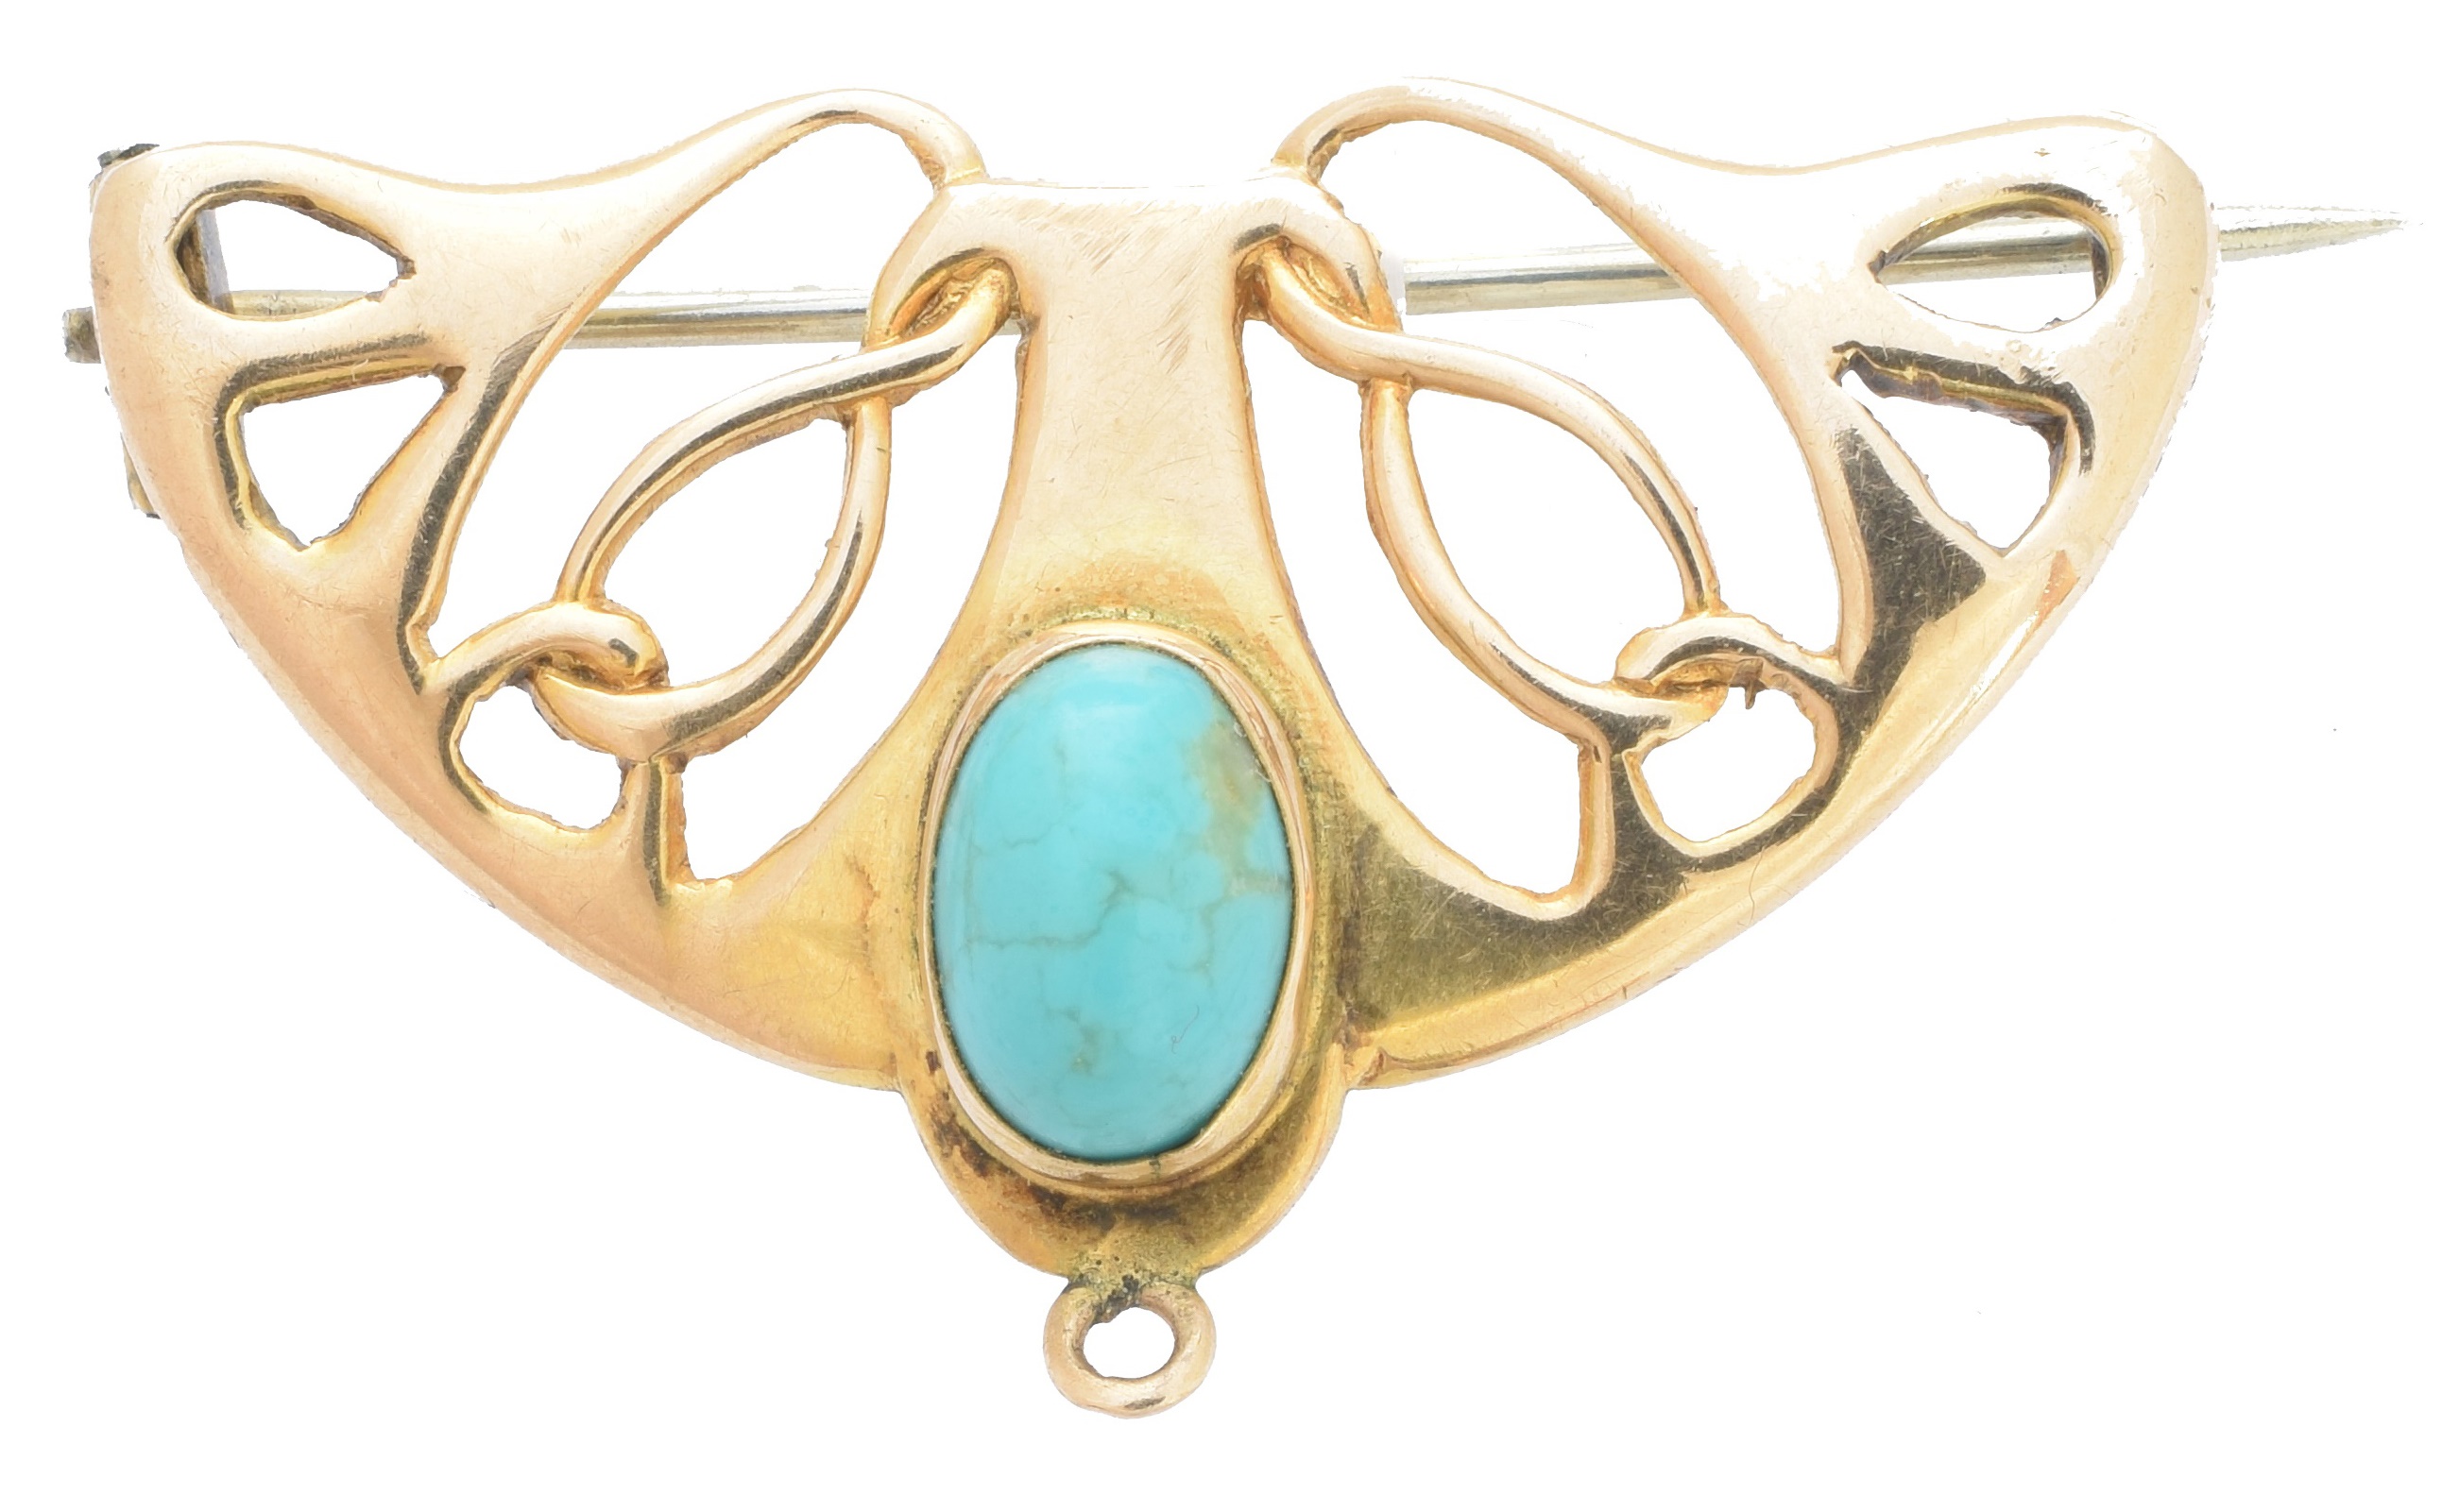 An Art Nouveau 9ct gold turquoise brooch by Henry Matthews